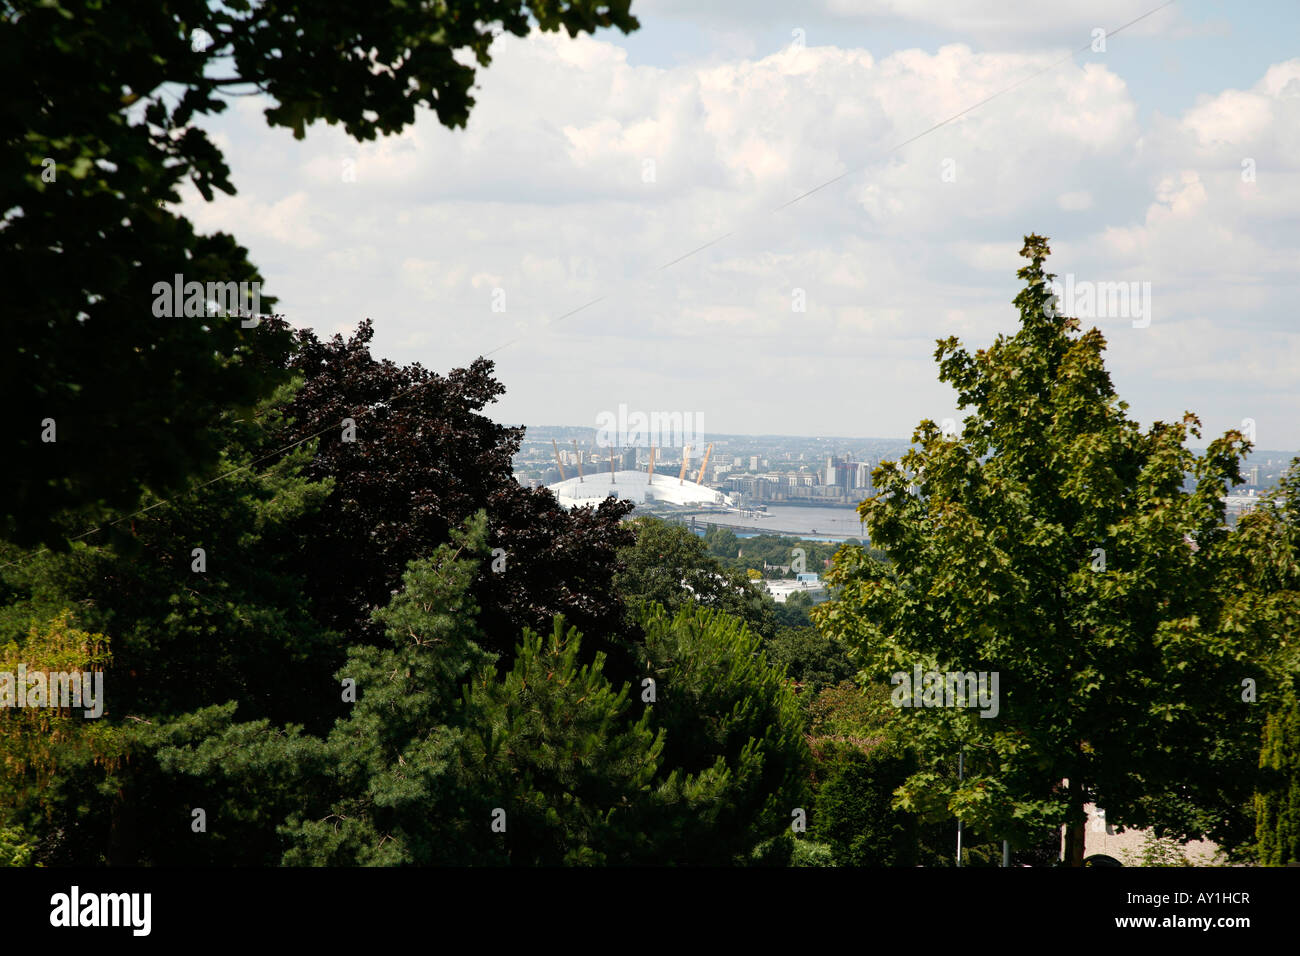 View of Millennium Dome from Shooters Hill, London Stock Photo